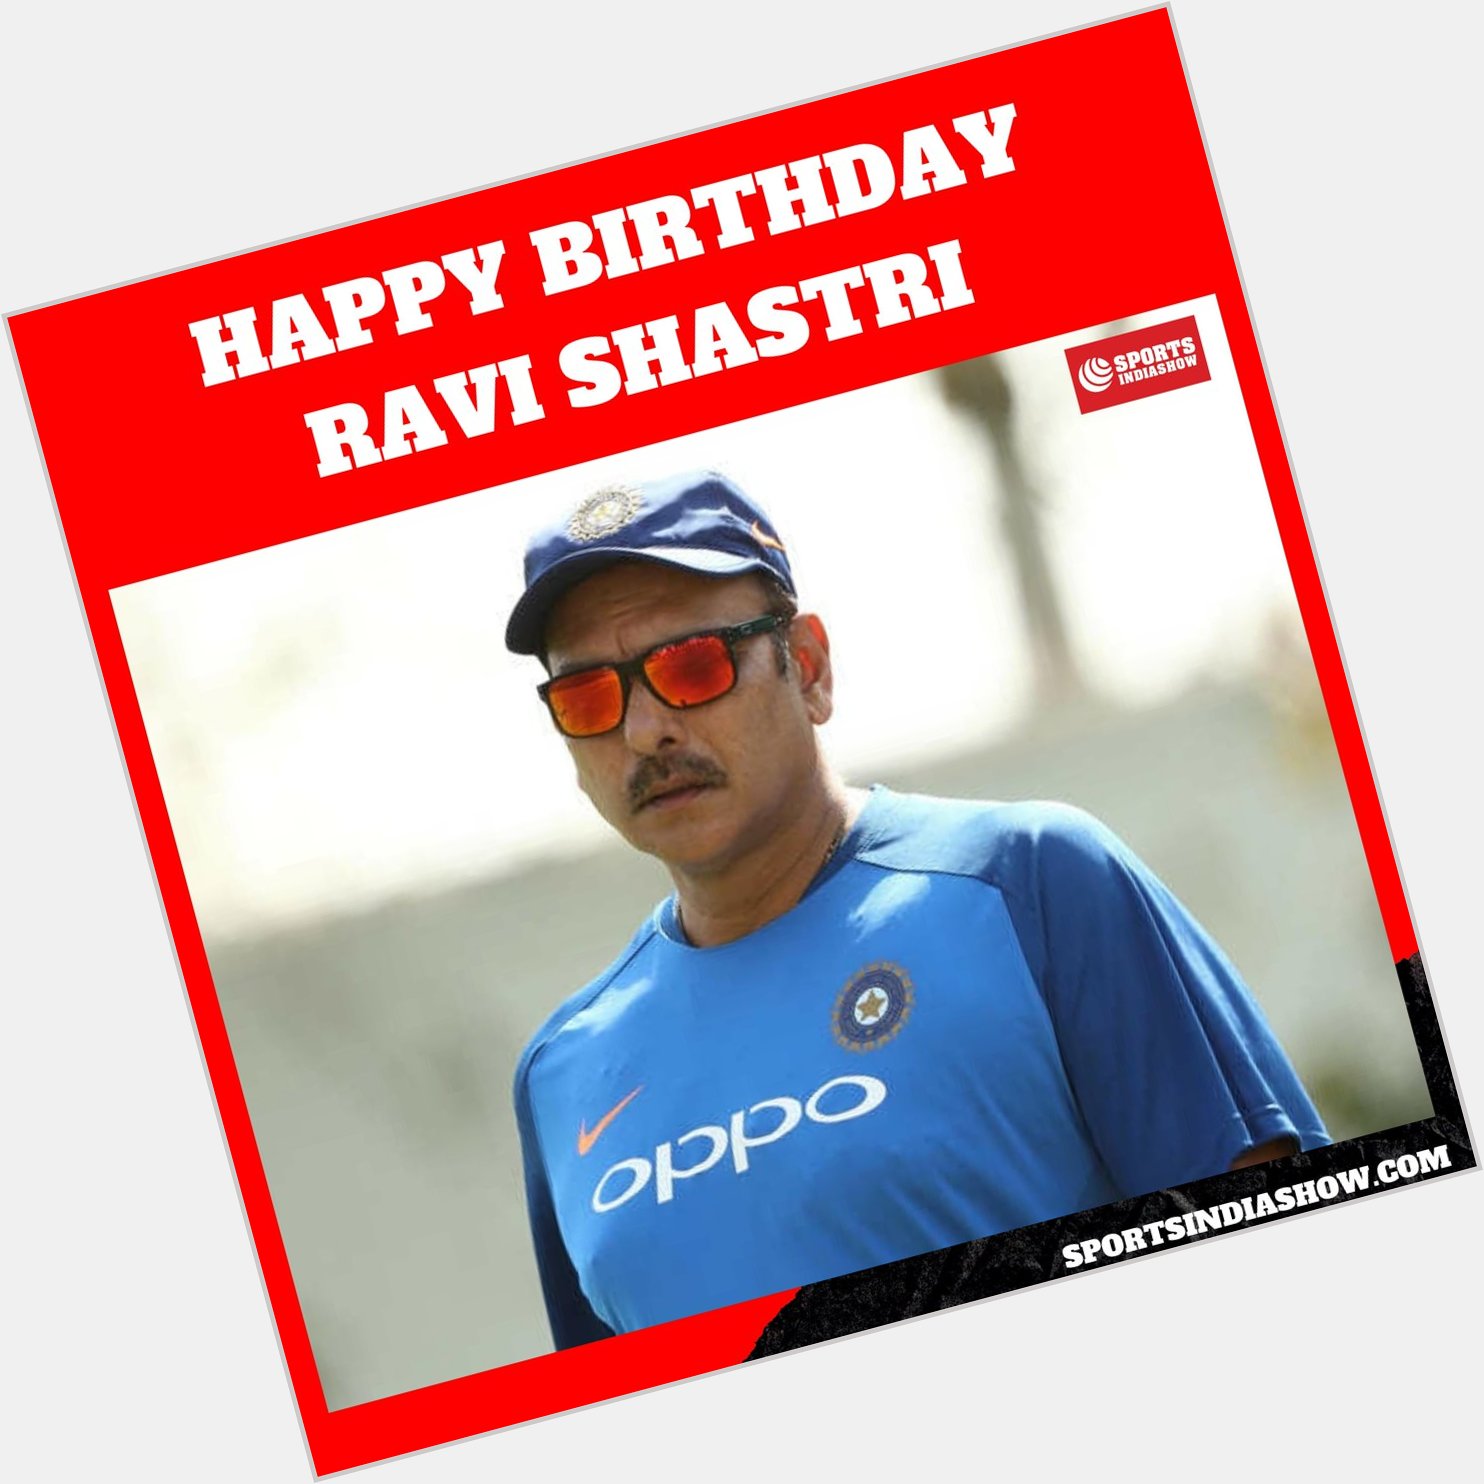 Wishing Ravi Shastri ( ) a very Happy birthday  Have a great one coach!   